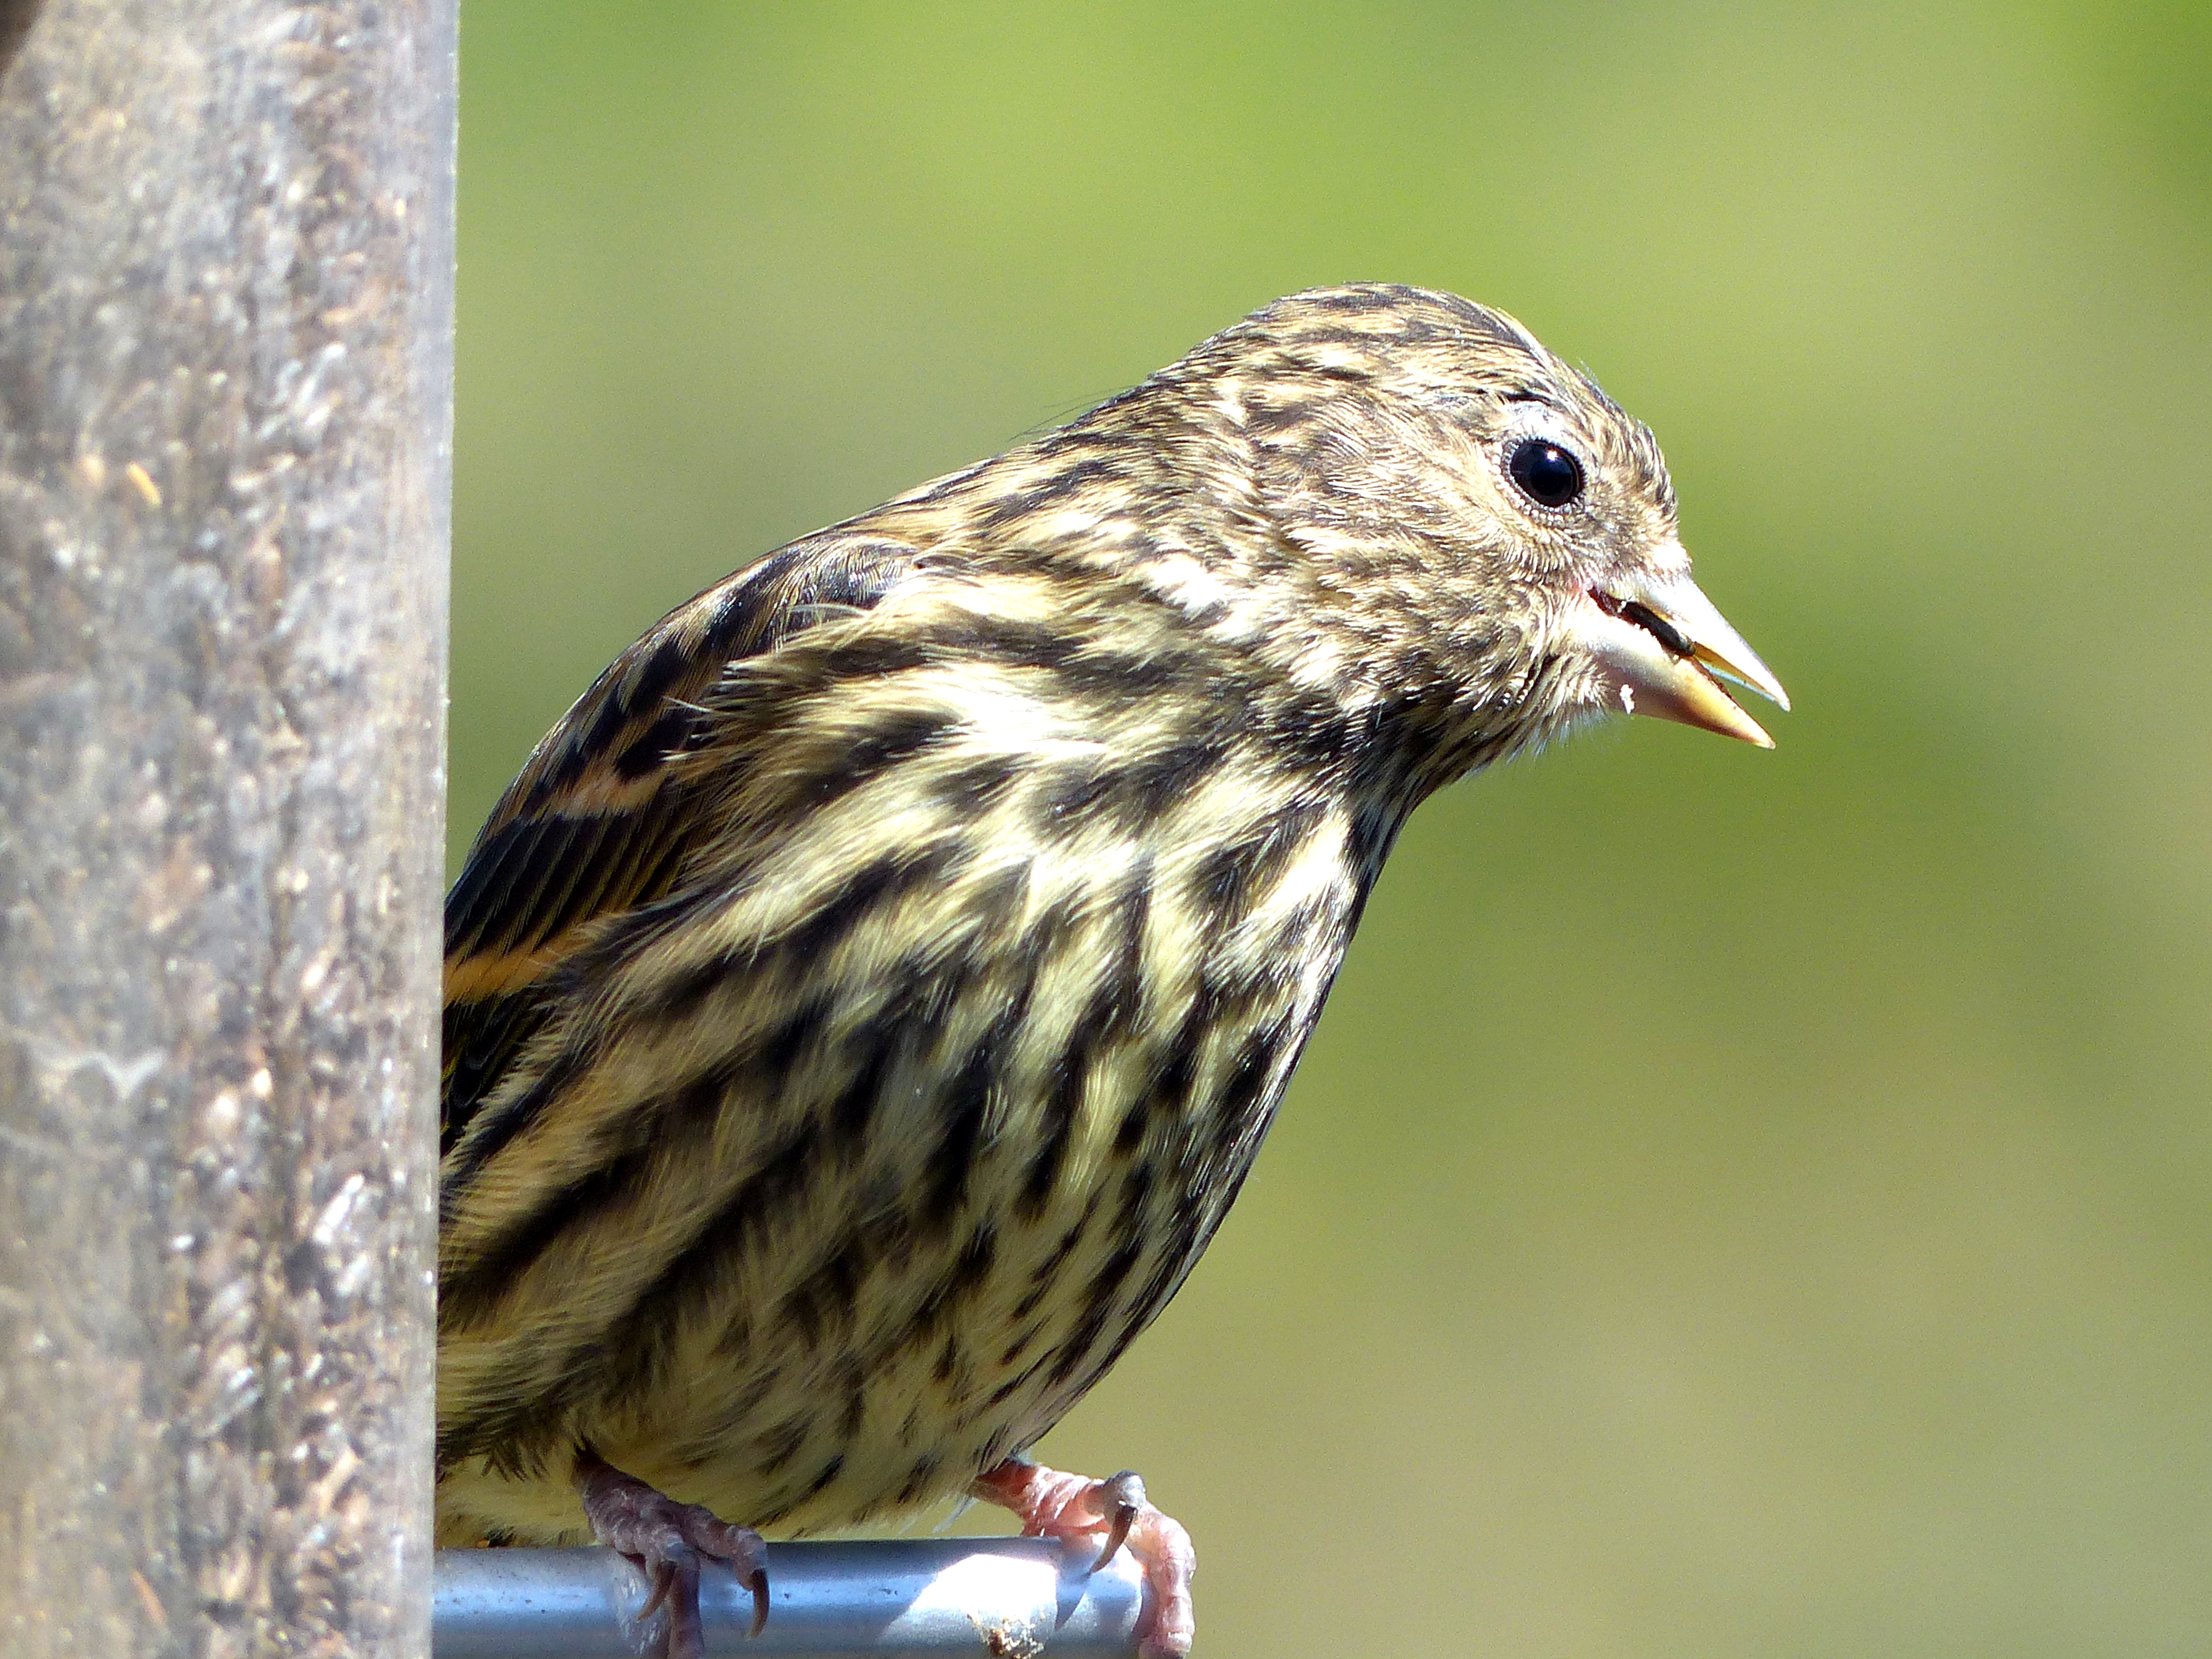 Close-up of a Pine Siskin sitting on a tube feeder with its beak open as it digests seed